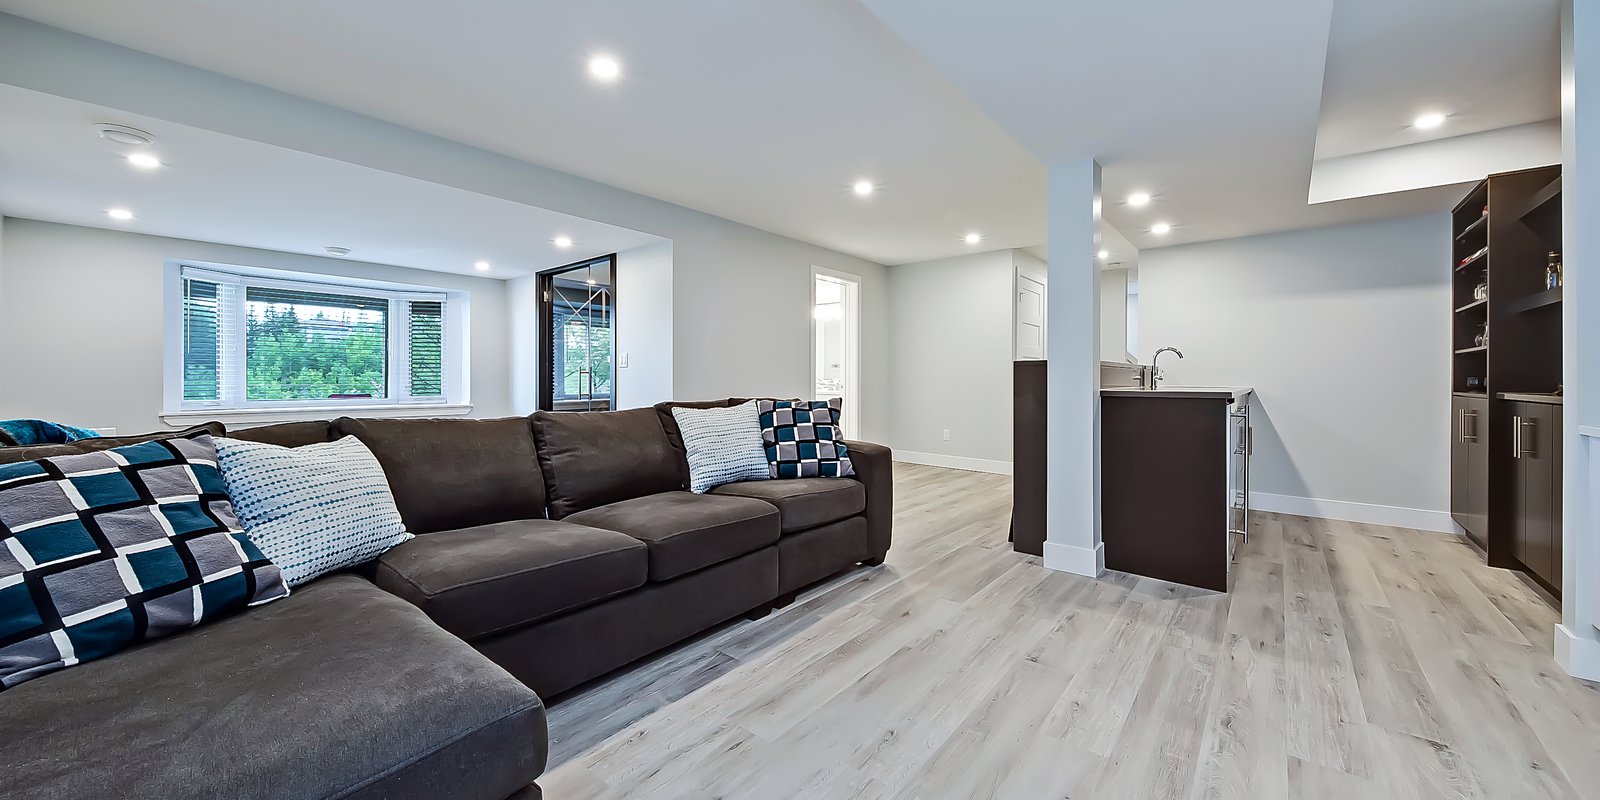 Basement Flooring Options, What Is The Best Flooring In A Basement